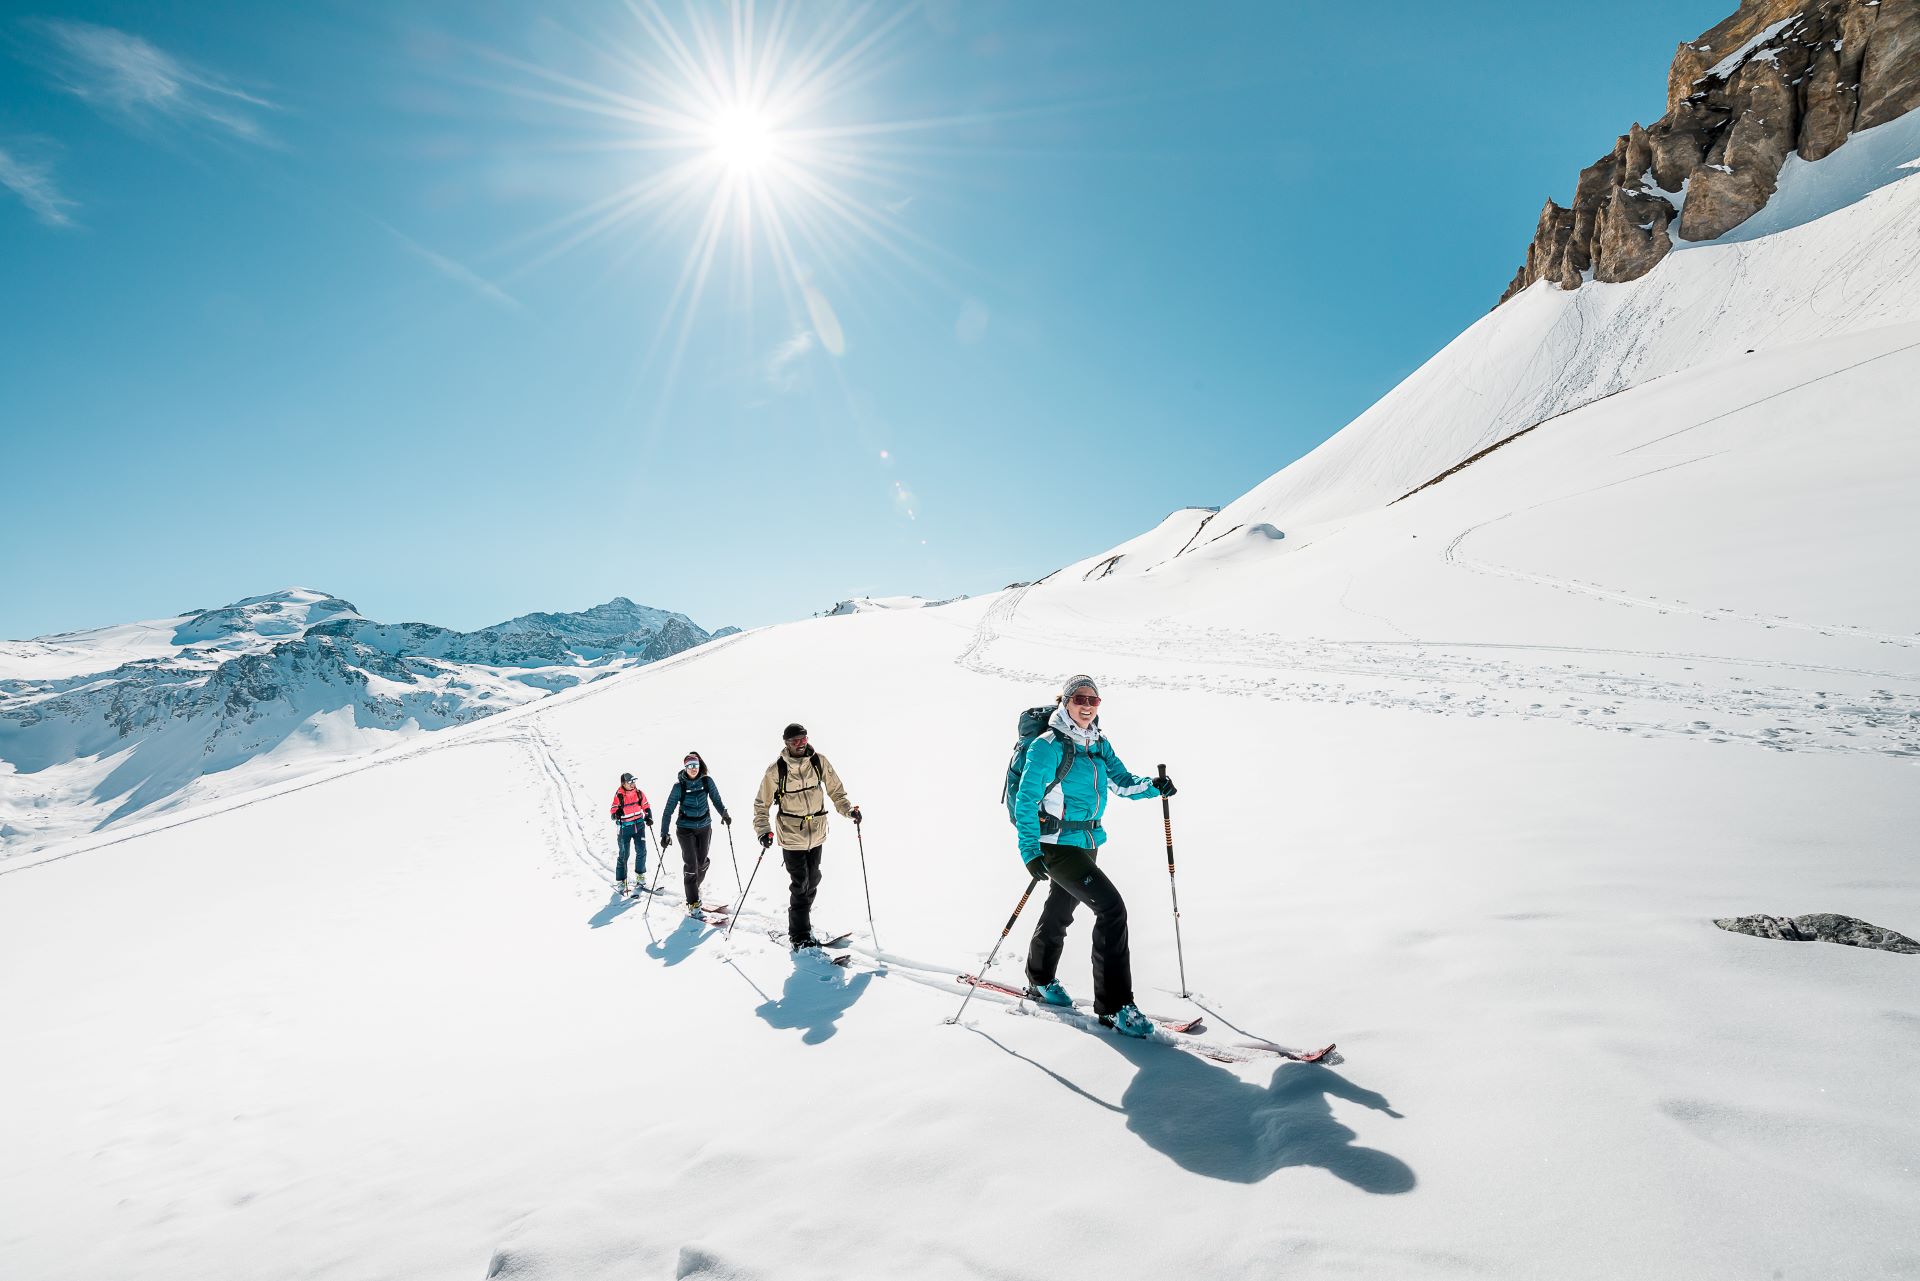 tignes-cross-country-skiing-resort-winter-french-alps - © ©Andy Parant